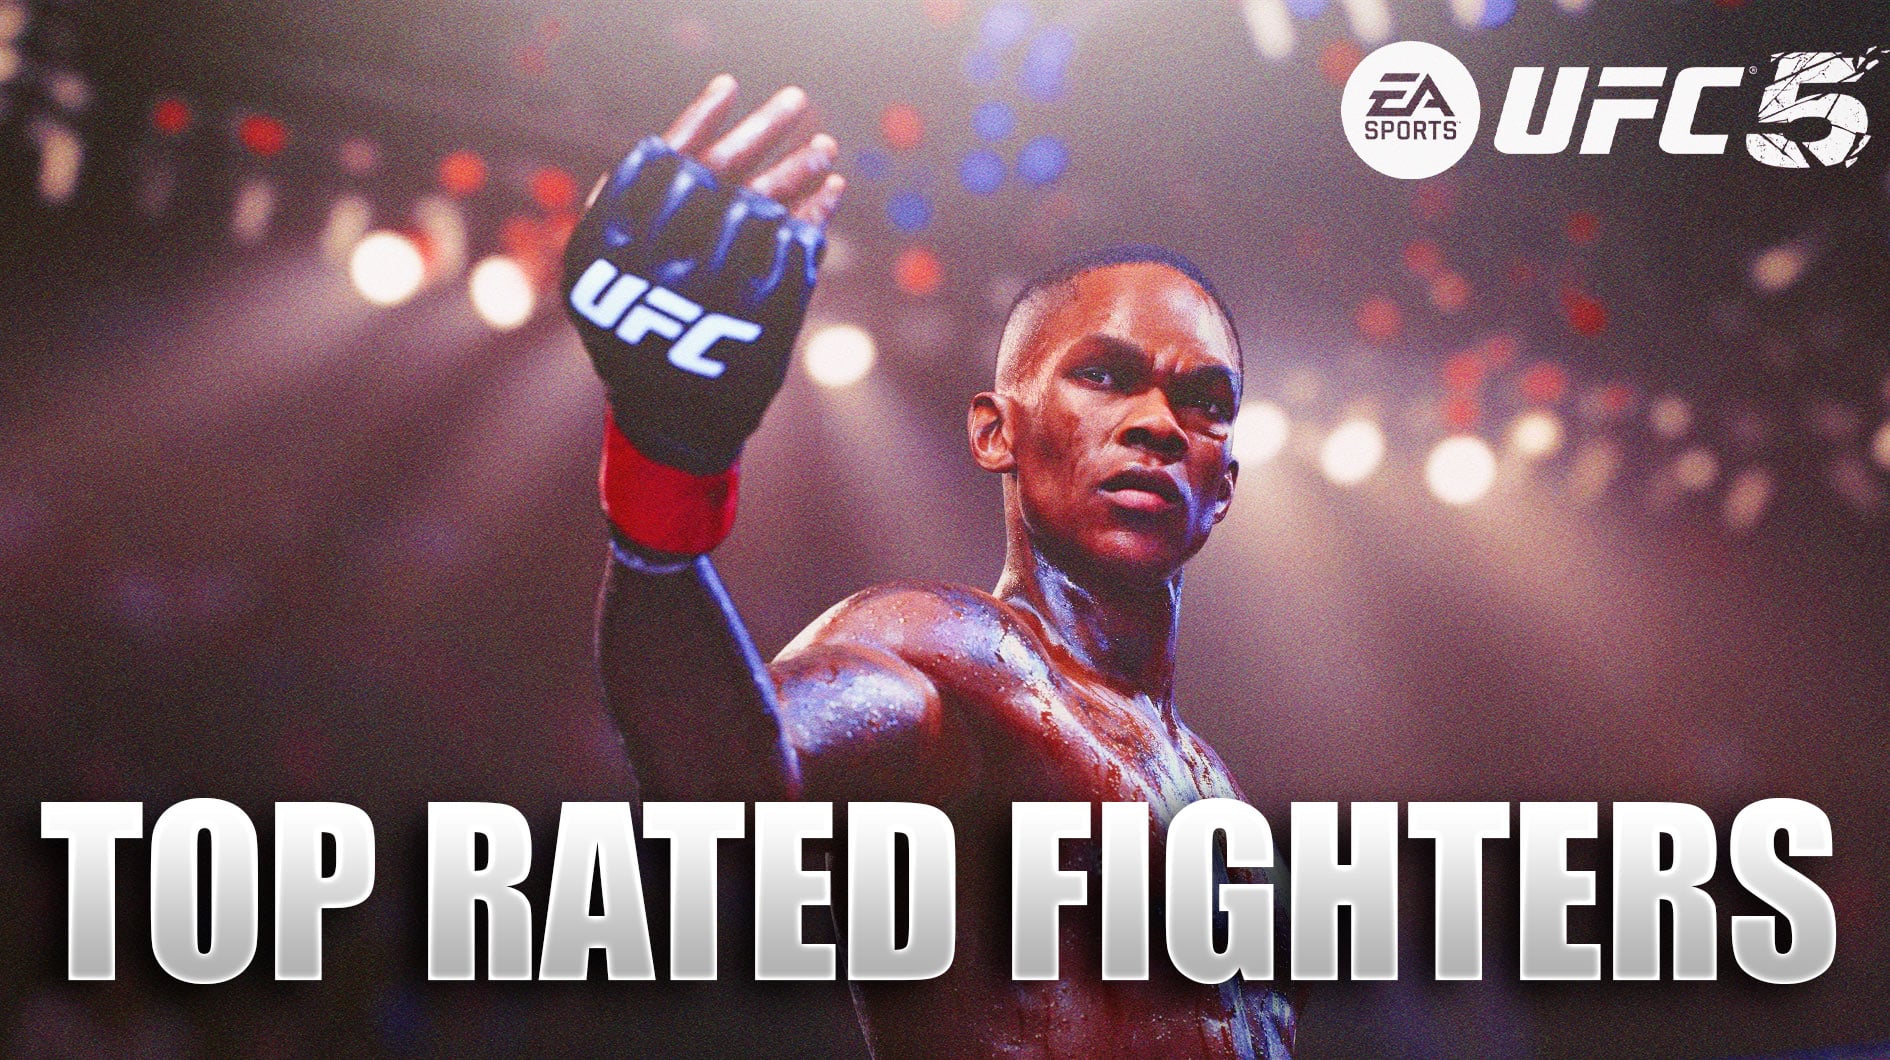 EA SPORTS UFC on X: It's time to meet the #UFC5 PRIME Alter Egos